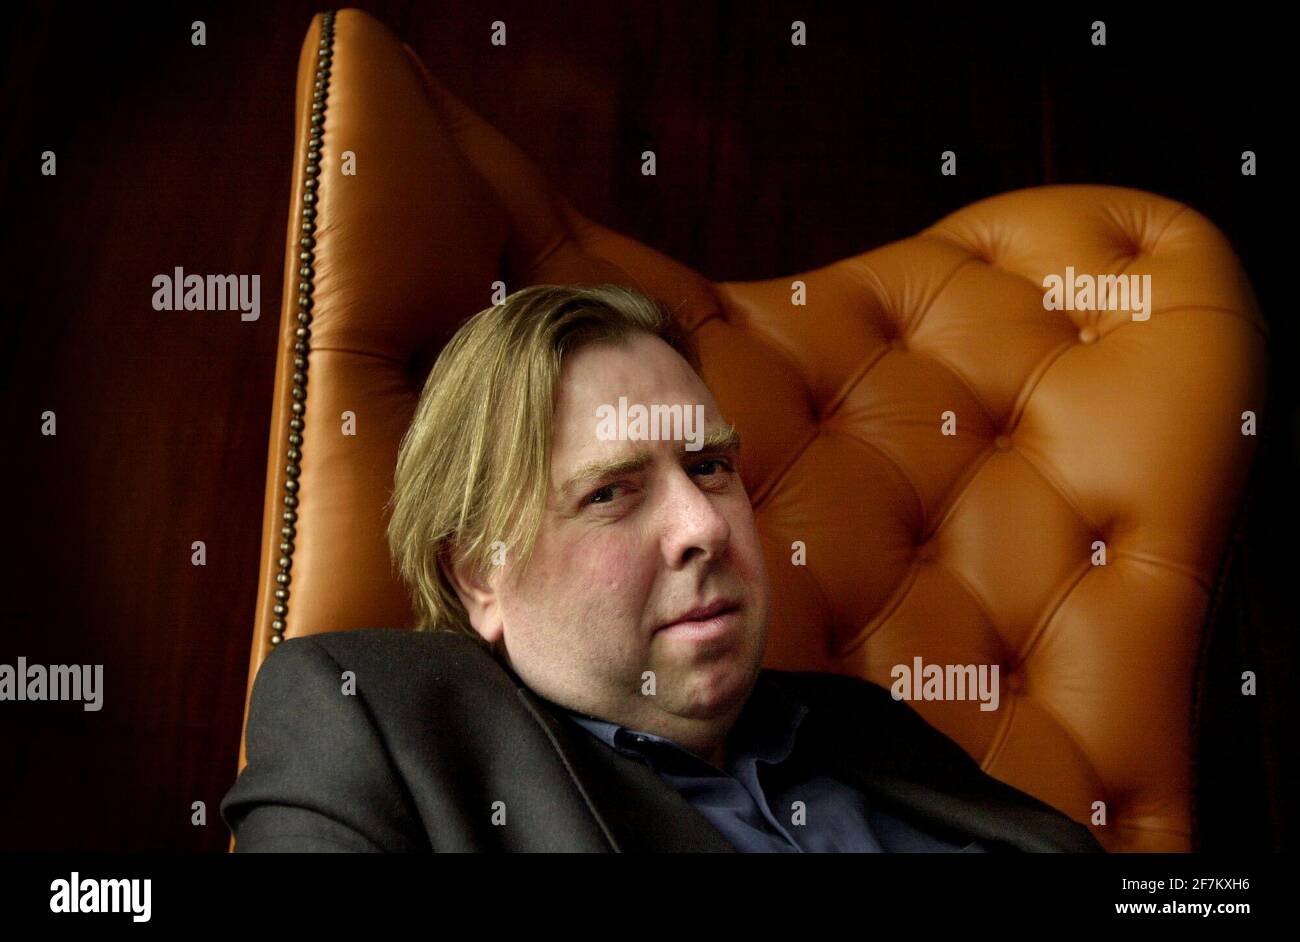 ACTOR TIMOTHY SPALL. Stock Photo